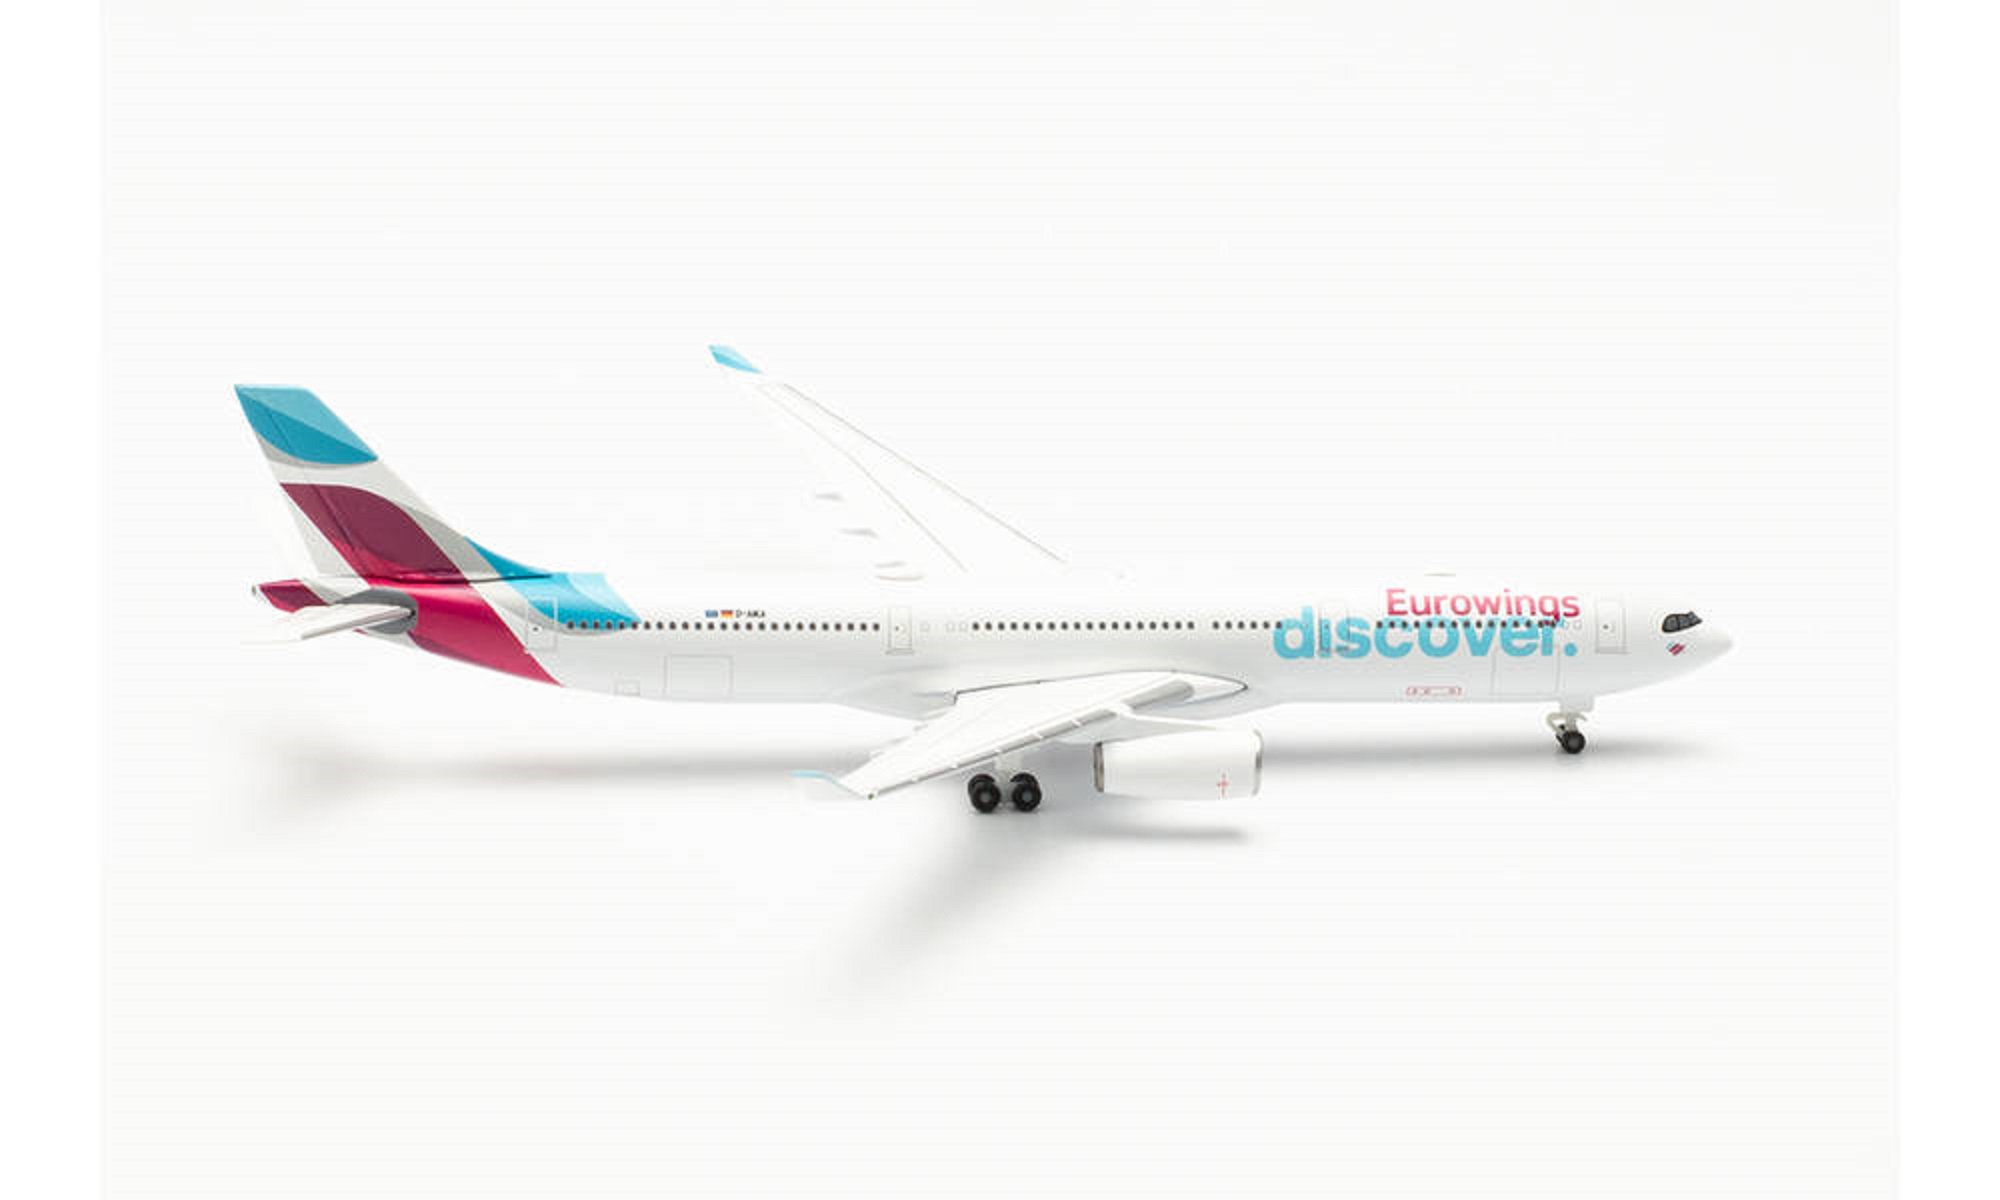 Airbus A330-300 Eurowings Discover